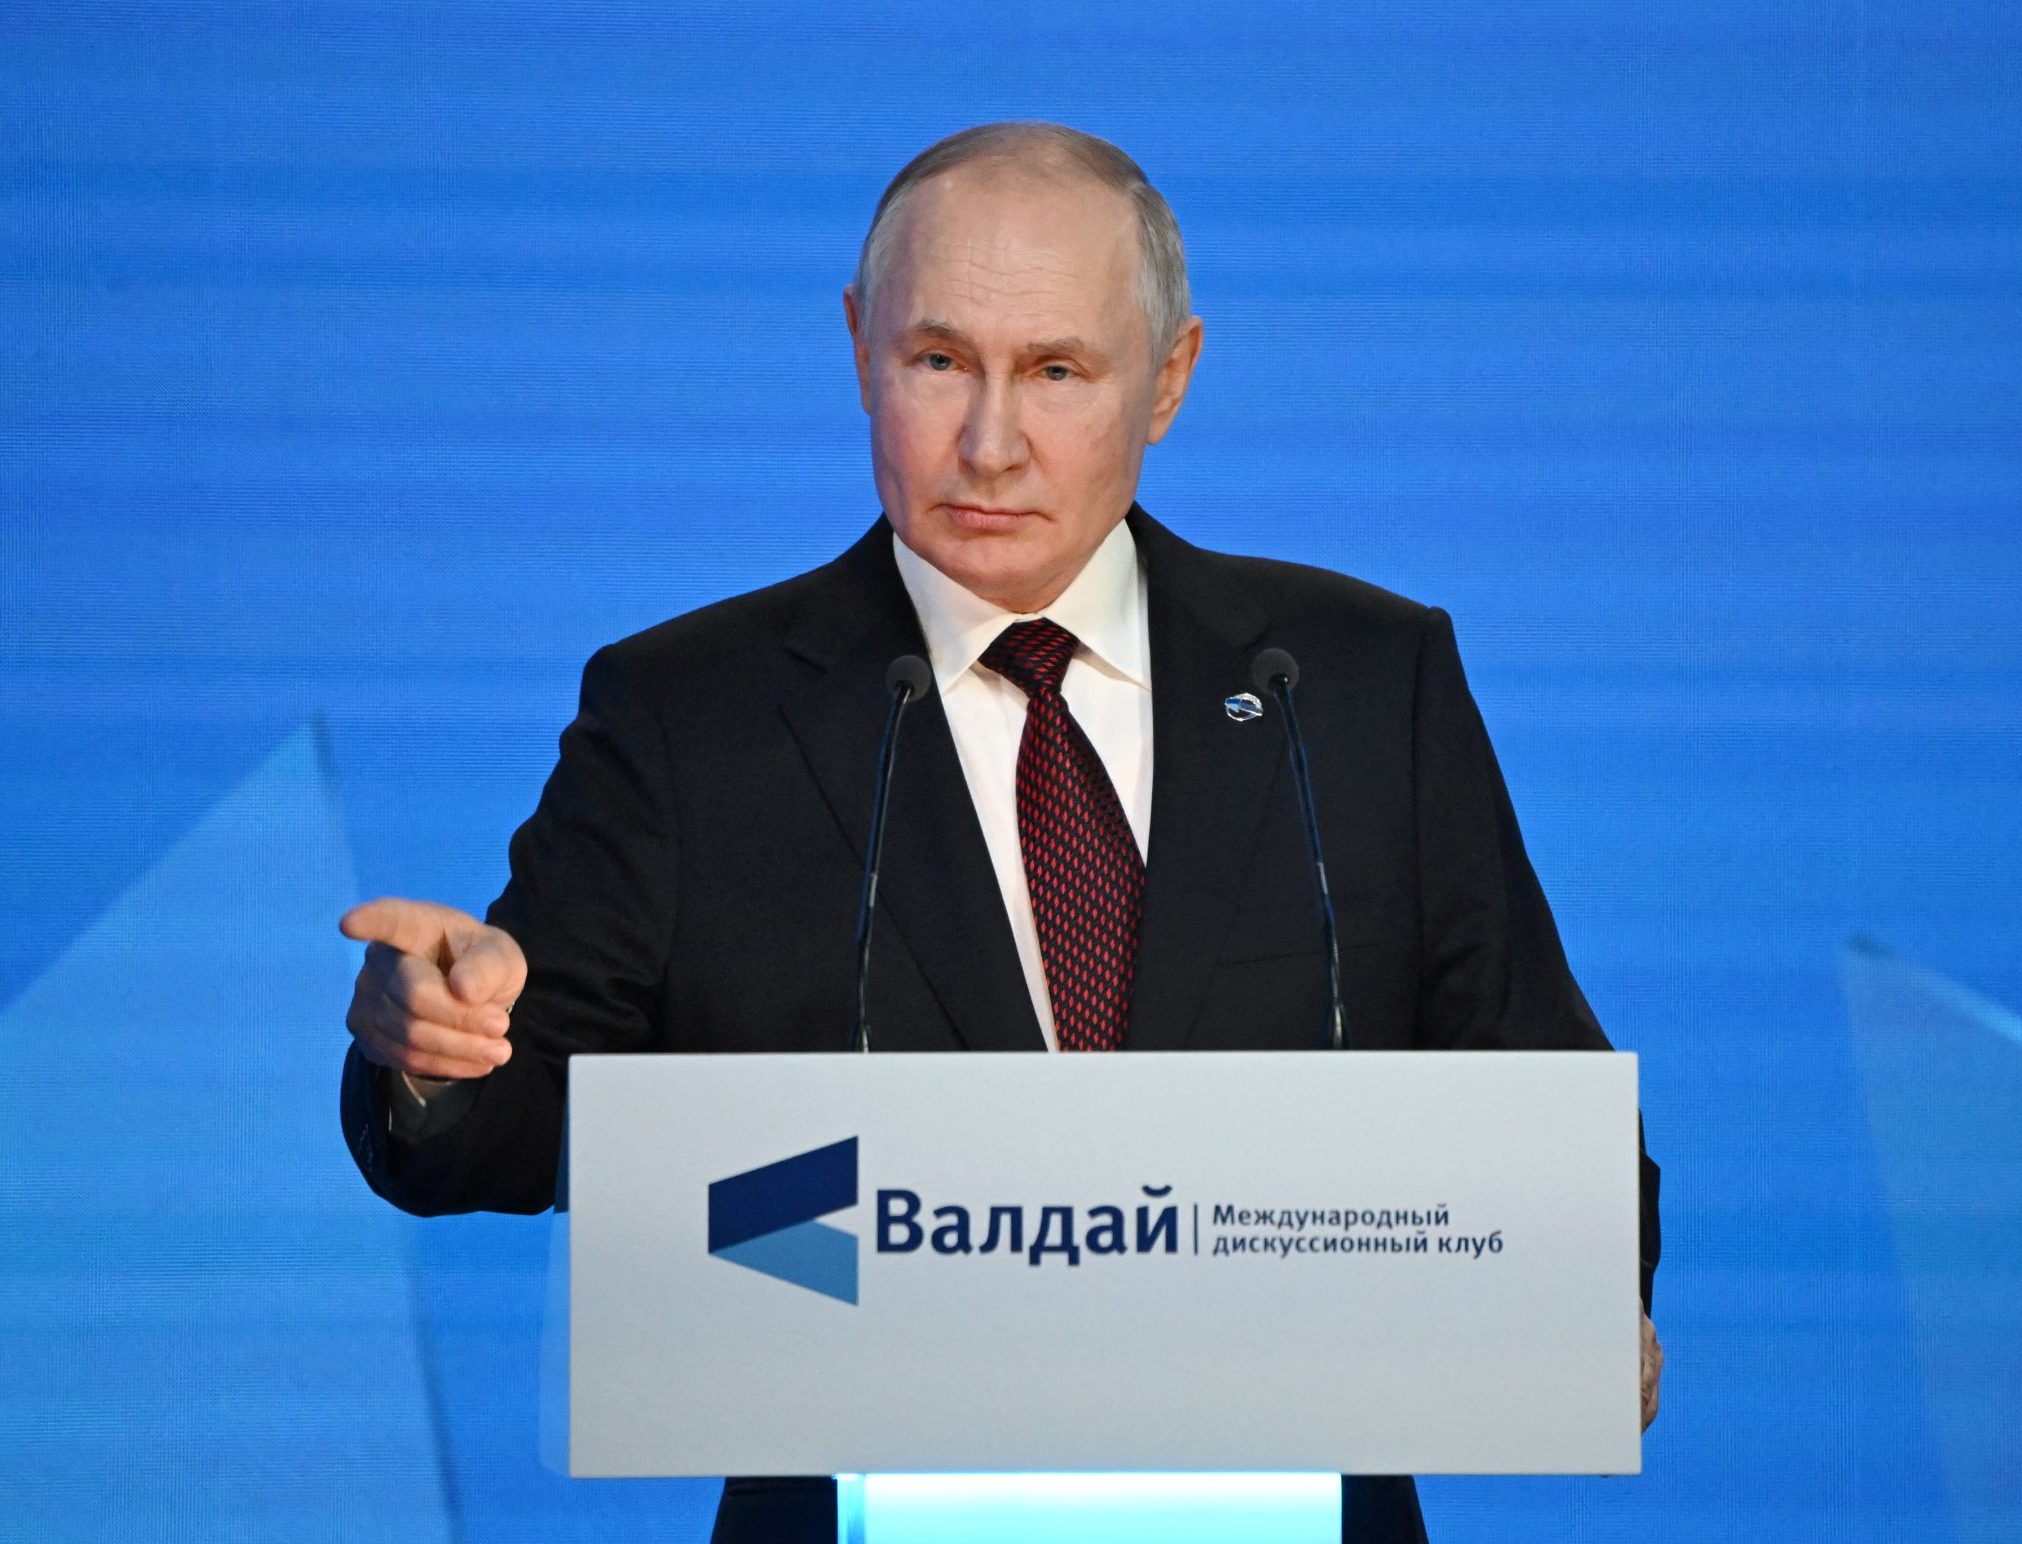 Vladimir Putin is still convinced he can outlast the West in Ukraine - Atlantic Council